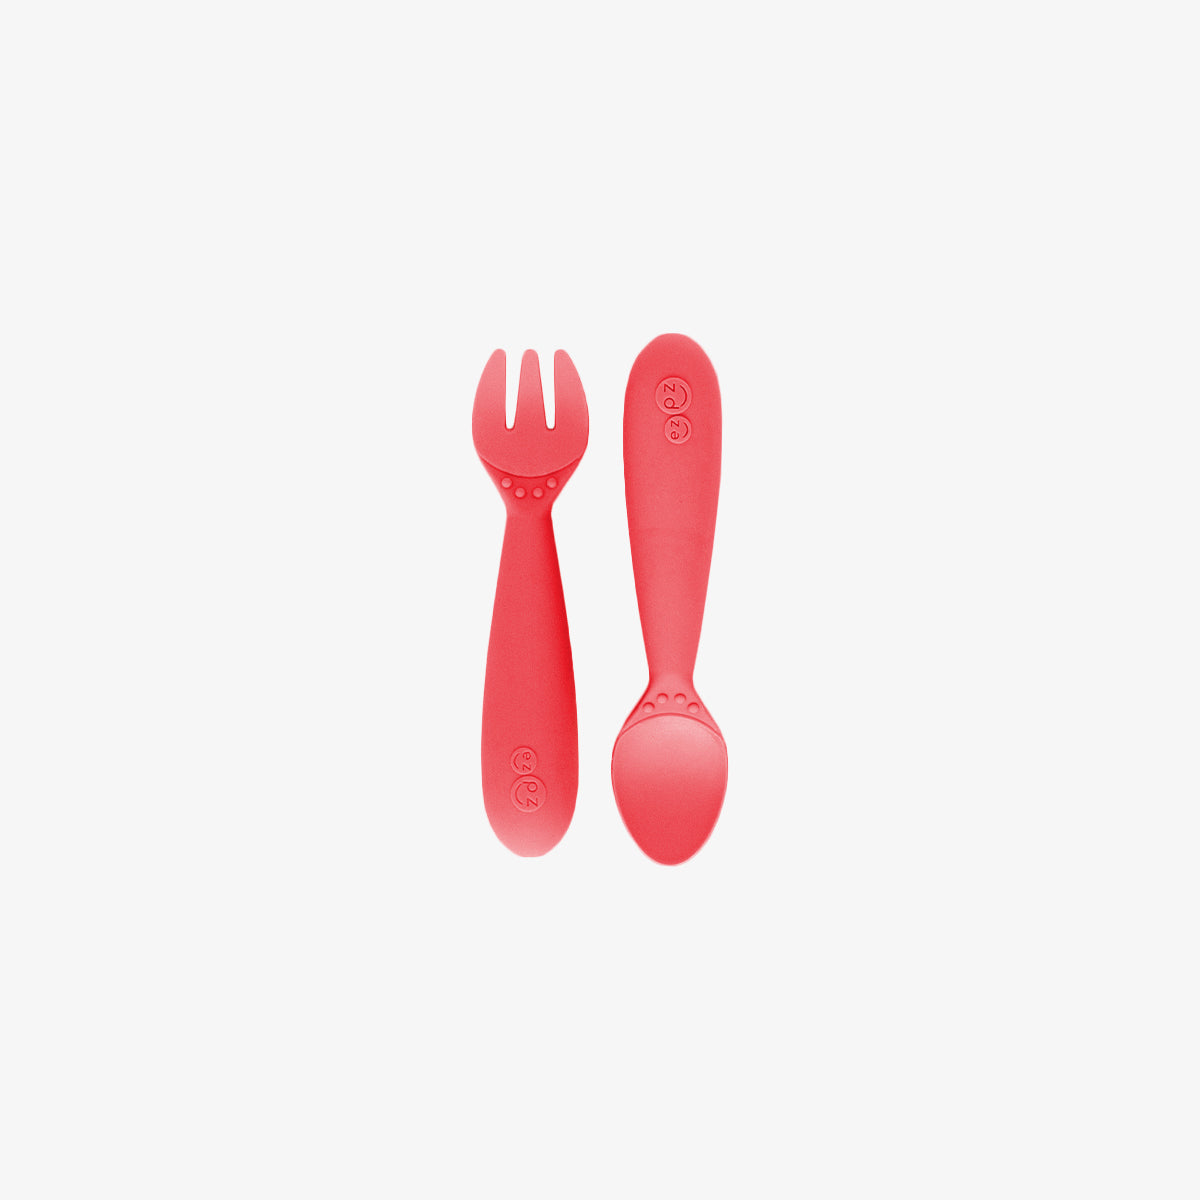 Mini Utensils in Coral by ezpz / Sensory Silicone Fork & Spoon for Toddlers